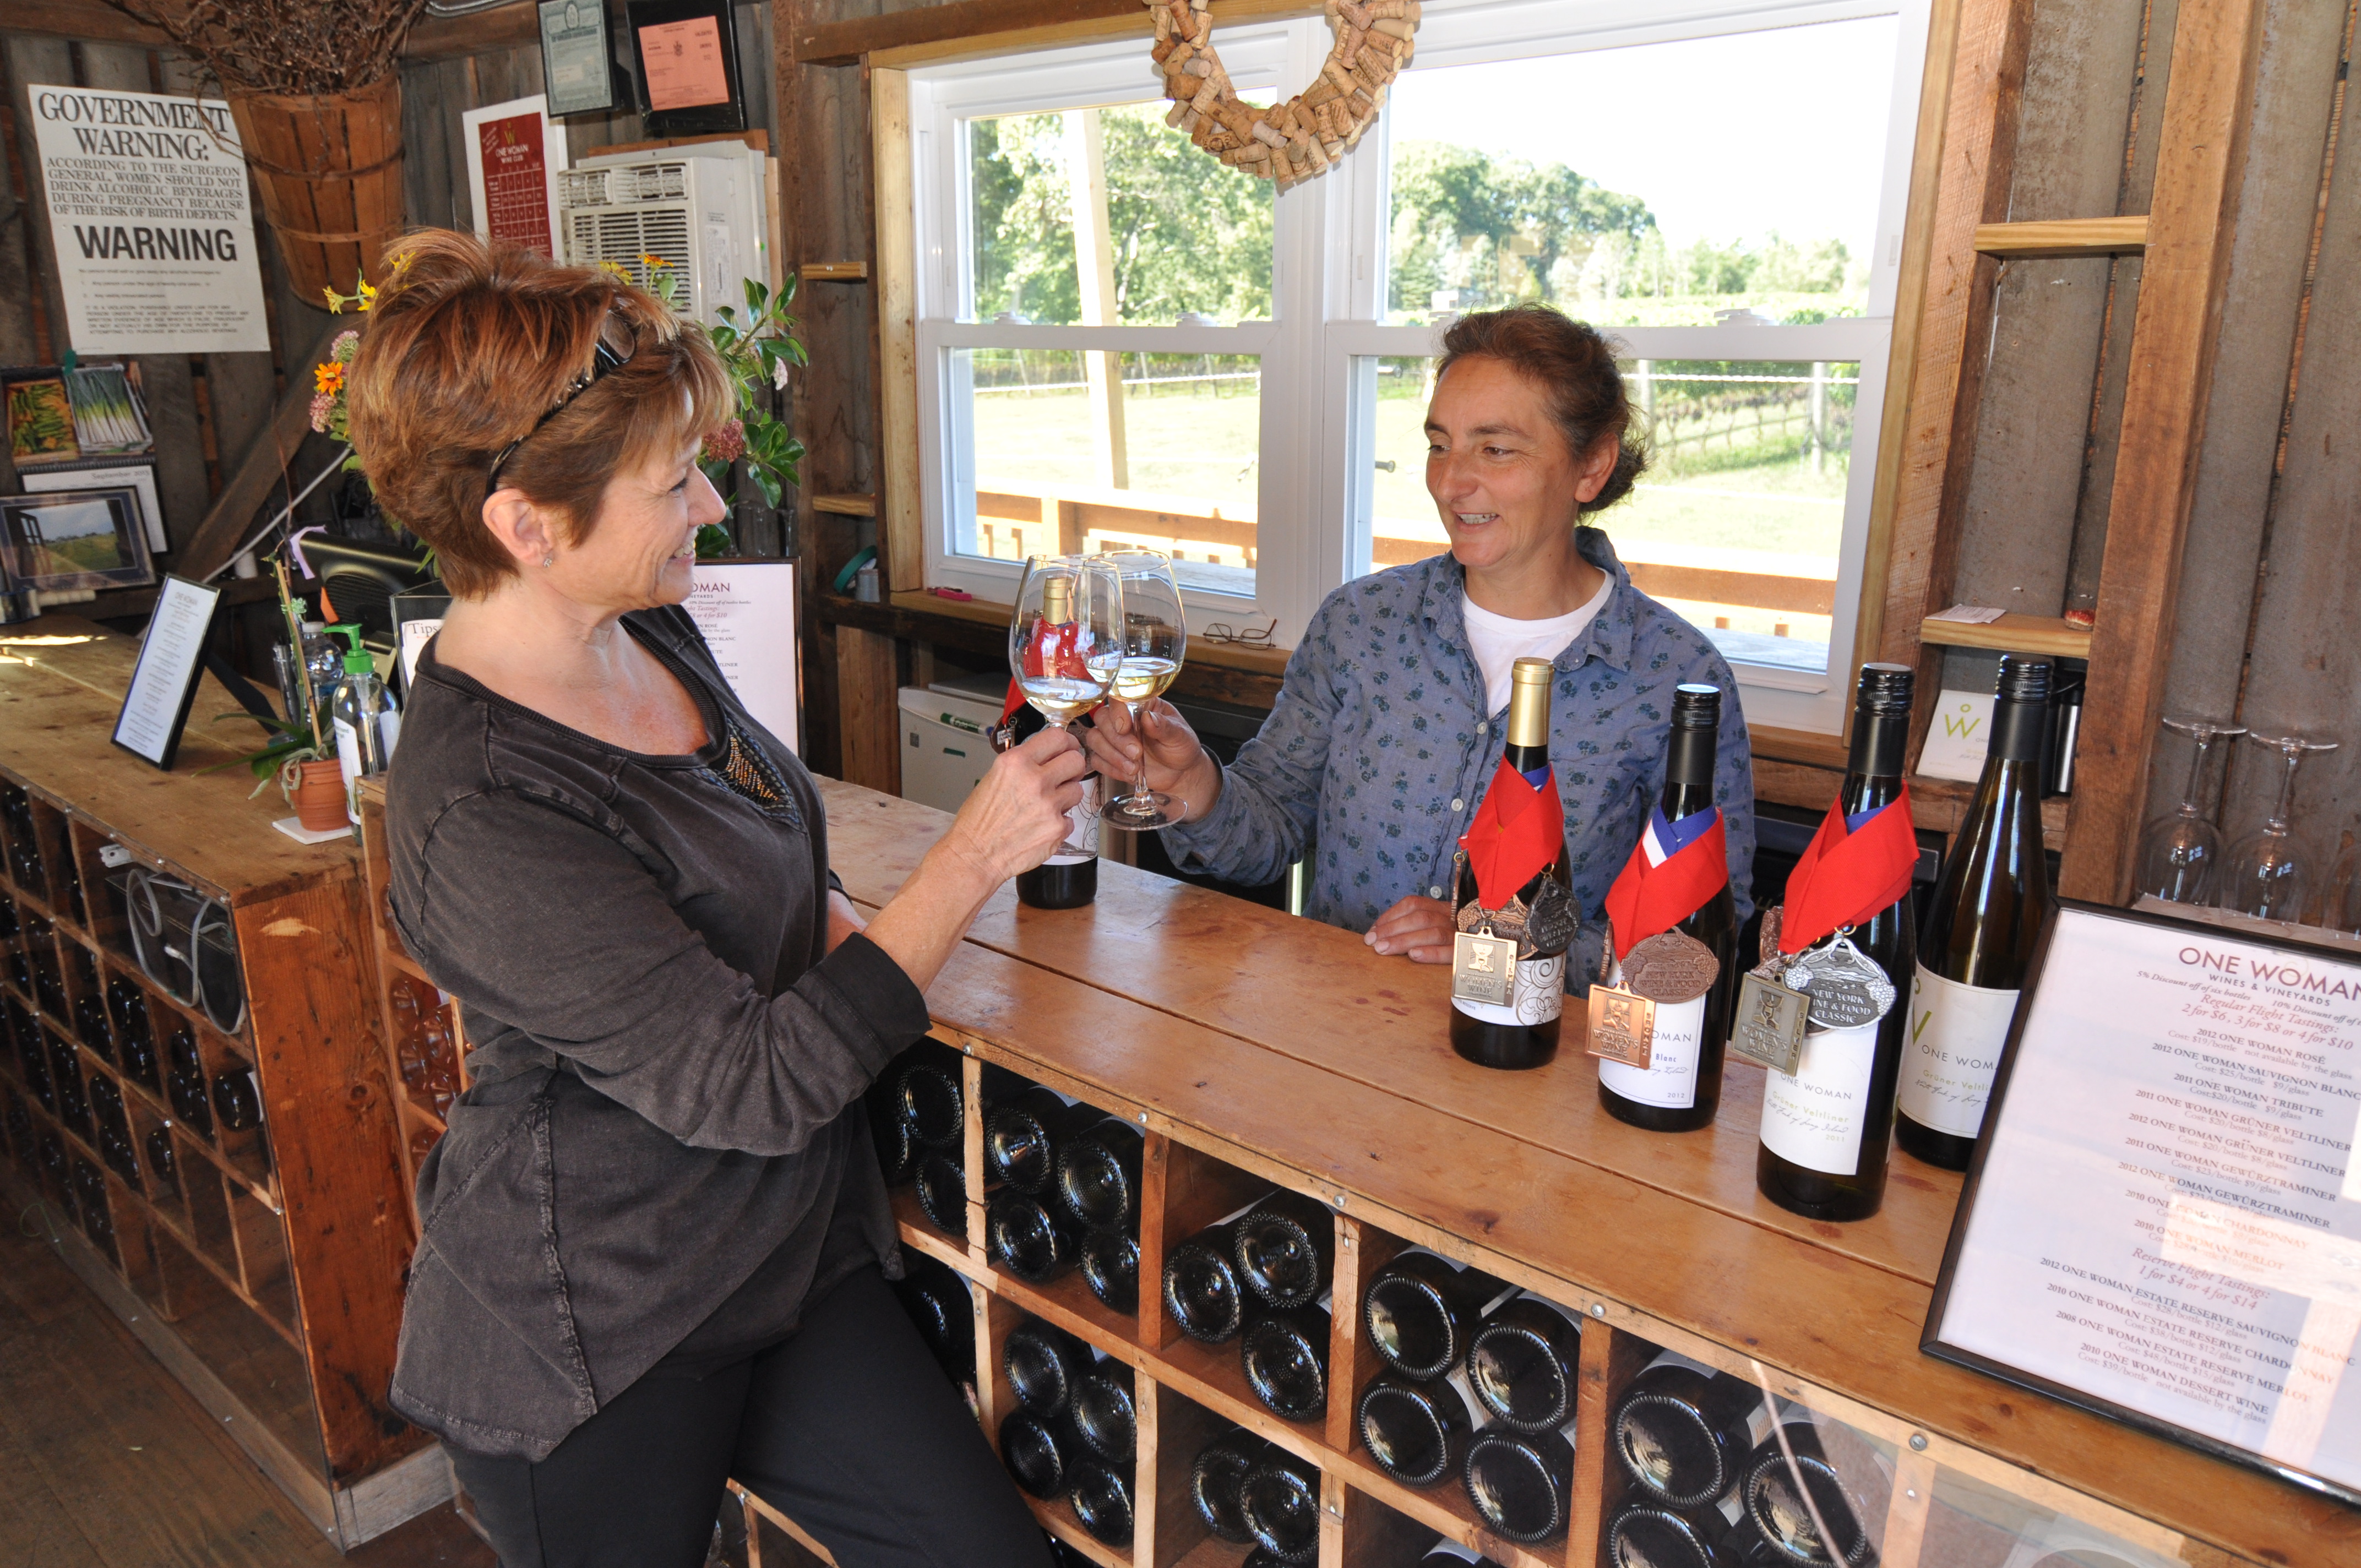 Here’s a photo of Cornell Cooperative Extension of Suffolk County's Agricultural Stewardship Program Coordinator, Becky Wiseman, along with Claudia Purita of One Woman Wines and Vineyards. Claudia is the wine owner, vineyard manager, and wine maker. Her vineyard is located on the Long Island Sound and she is a part of Cornell's Agricultural Stewardship Program, a program that is supported by the Long Island Sound Futures Fund.